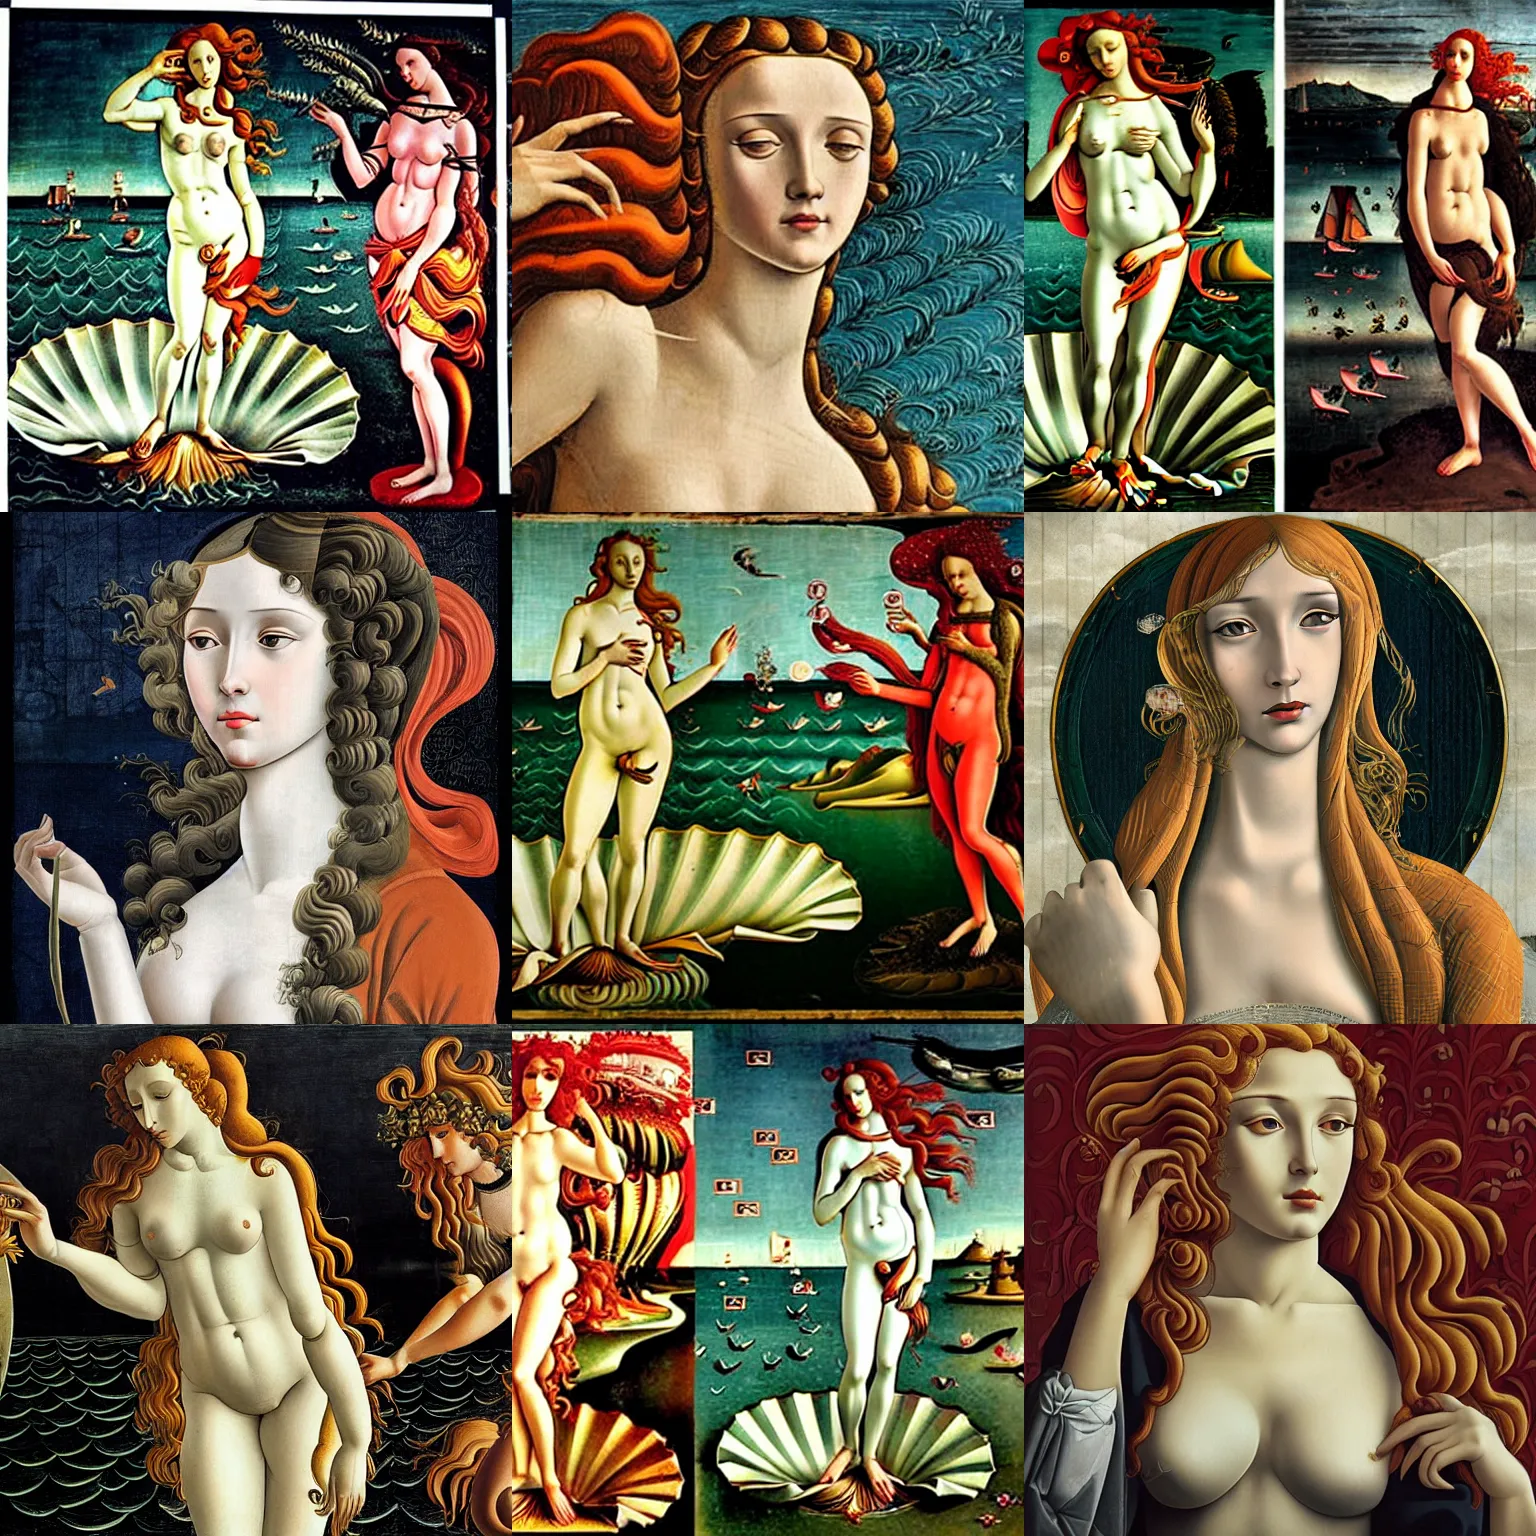 Prompt: The Birth of Venus of Sandro Botticelli as a gritty film noir, cyberpunk mood